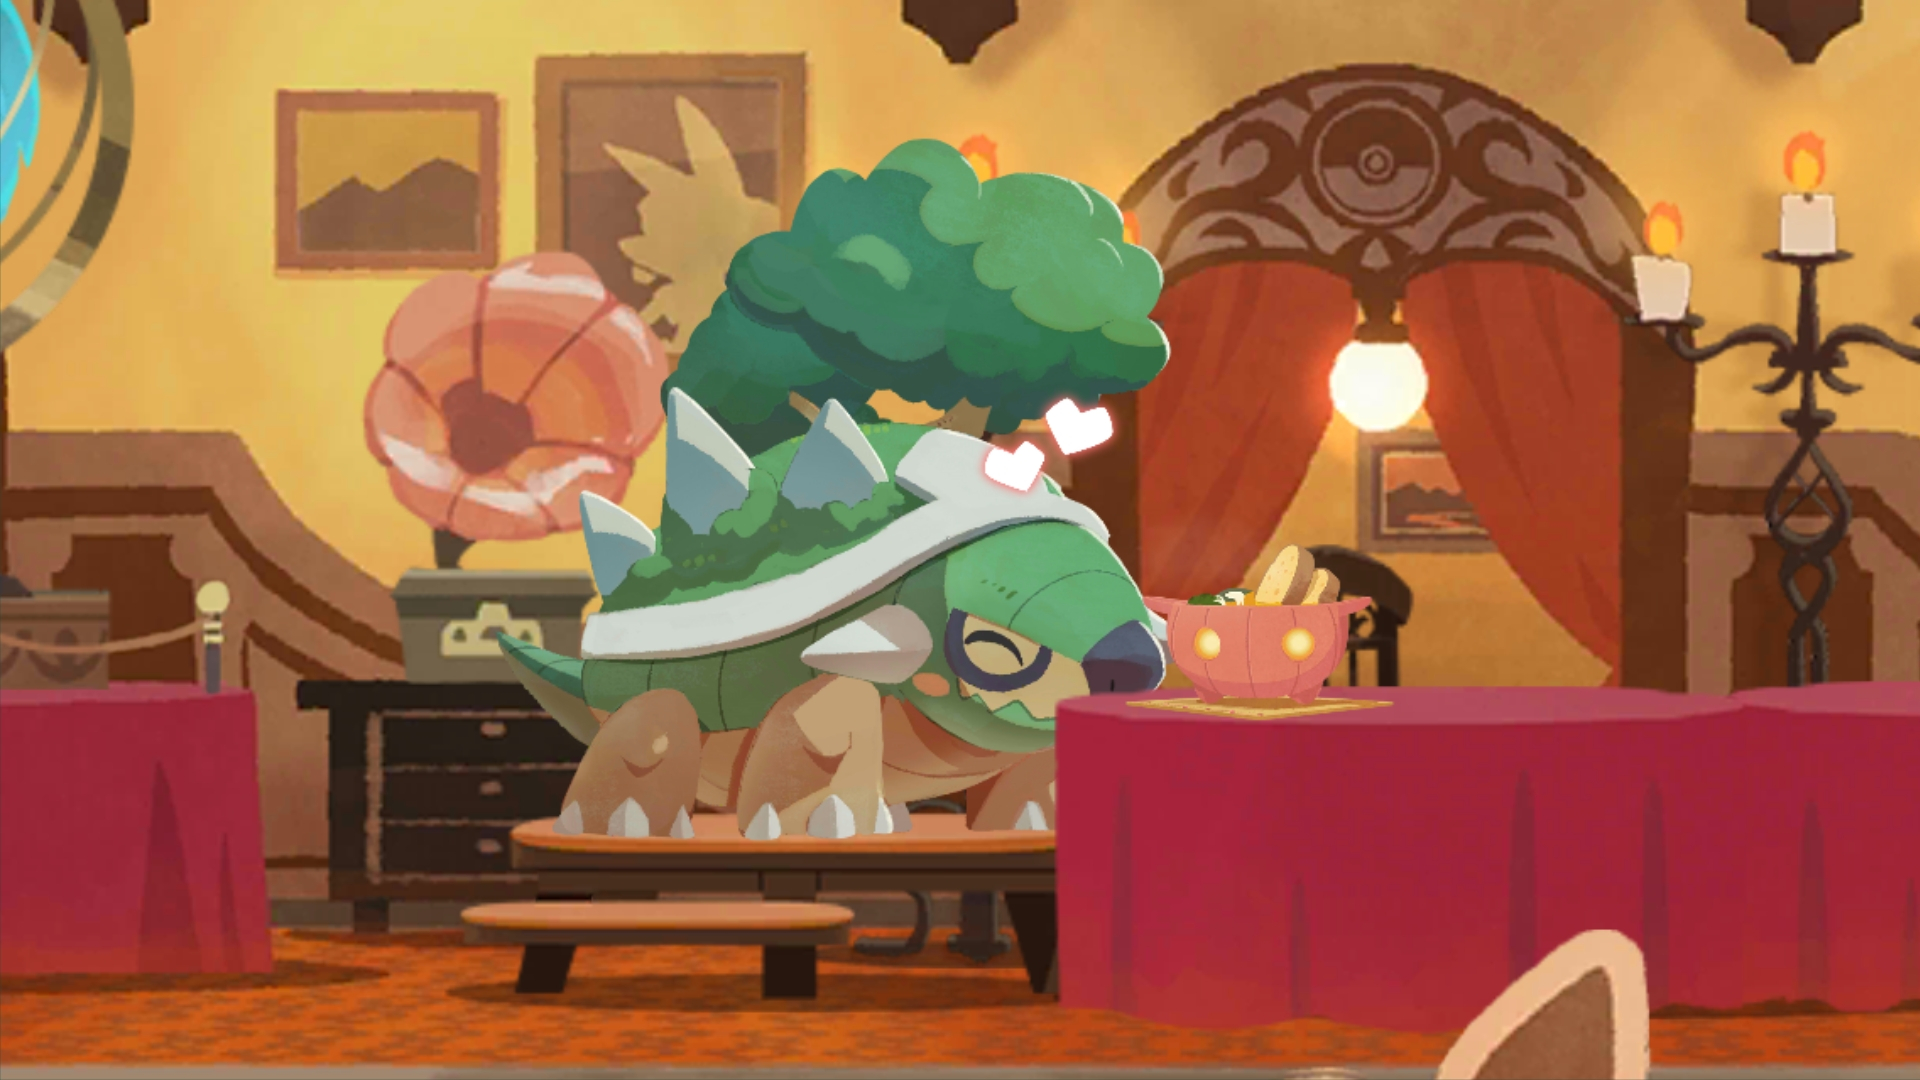 1920x1080 Torterra gets an extra bank with cute stairs for seating! : r/PokemonCafeMix